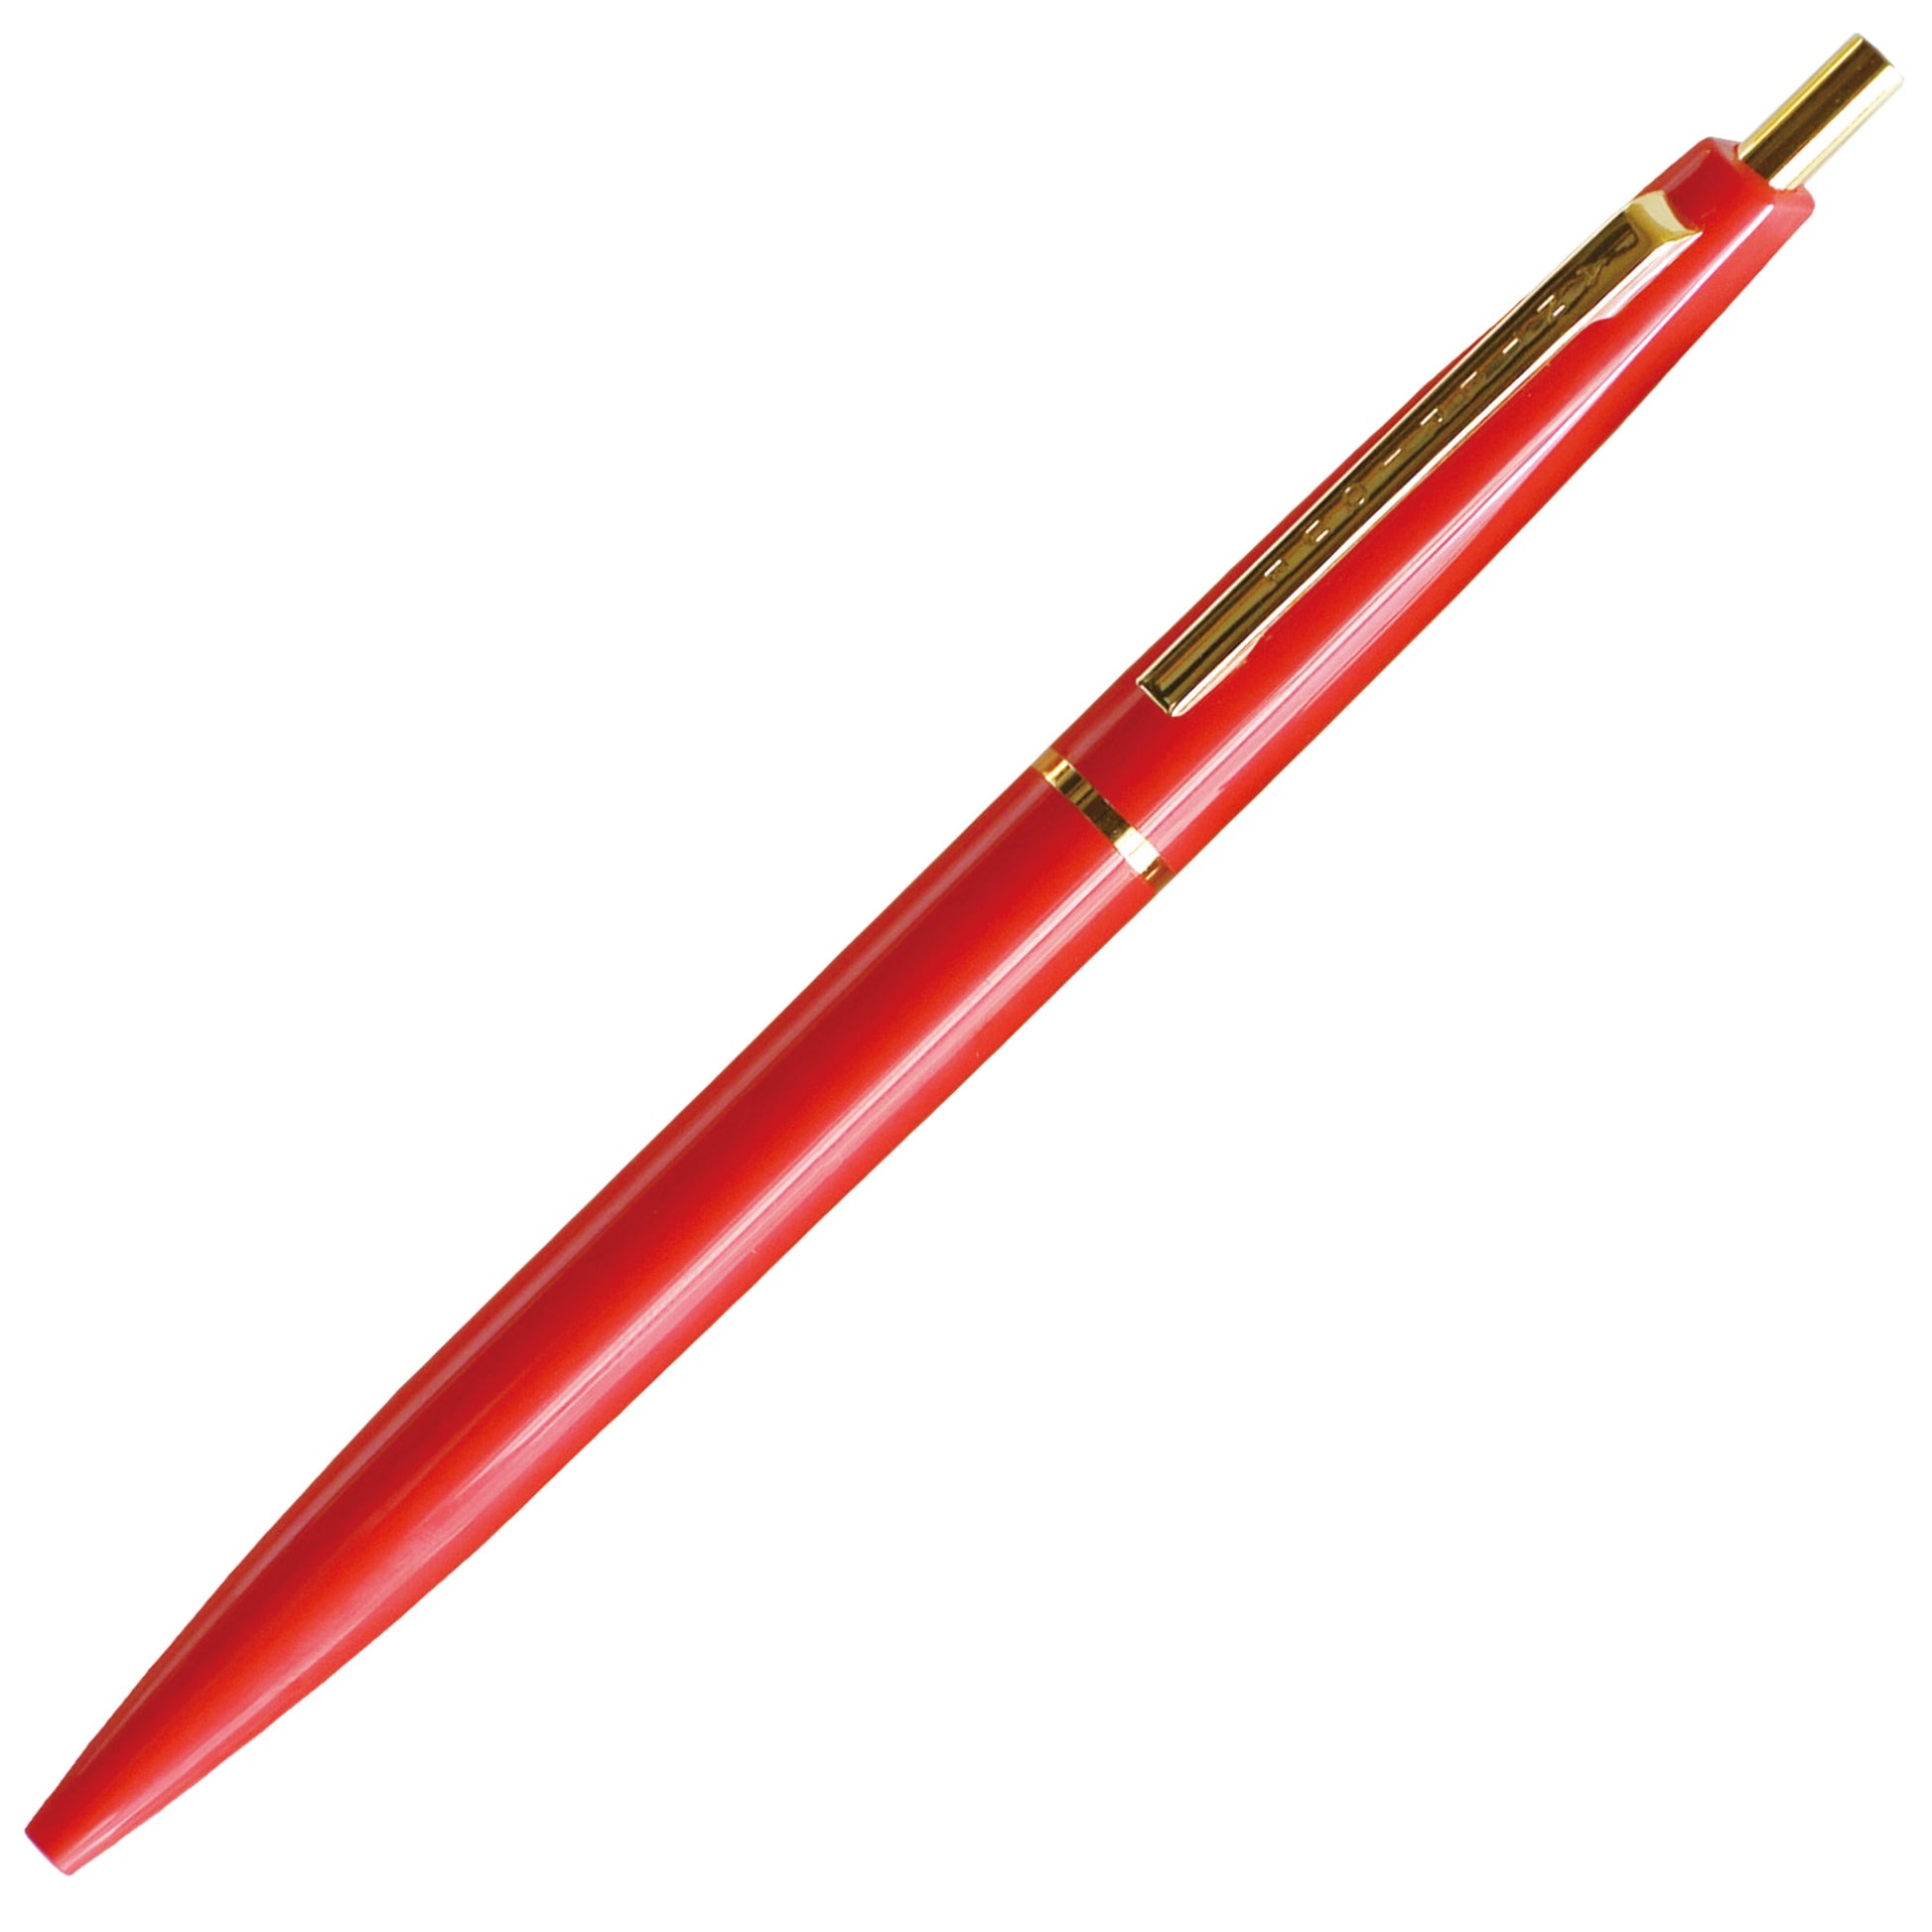 Anterique Fire Red Ballpoint Pen ATBP1-FR Made in Japan Fire Red